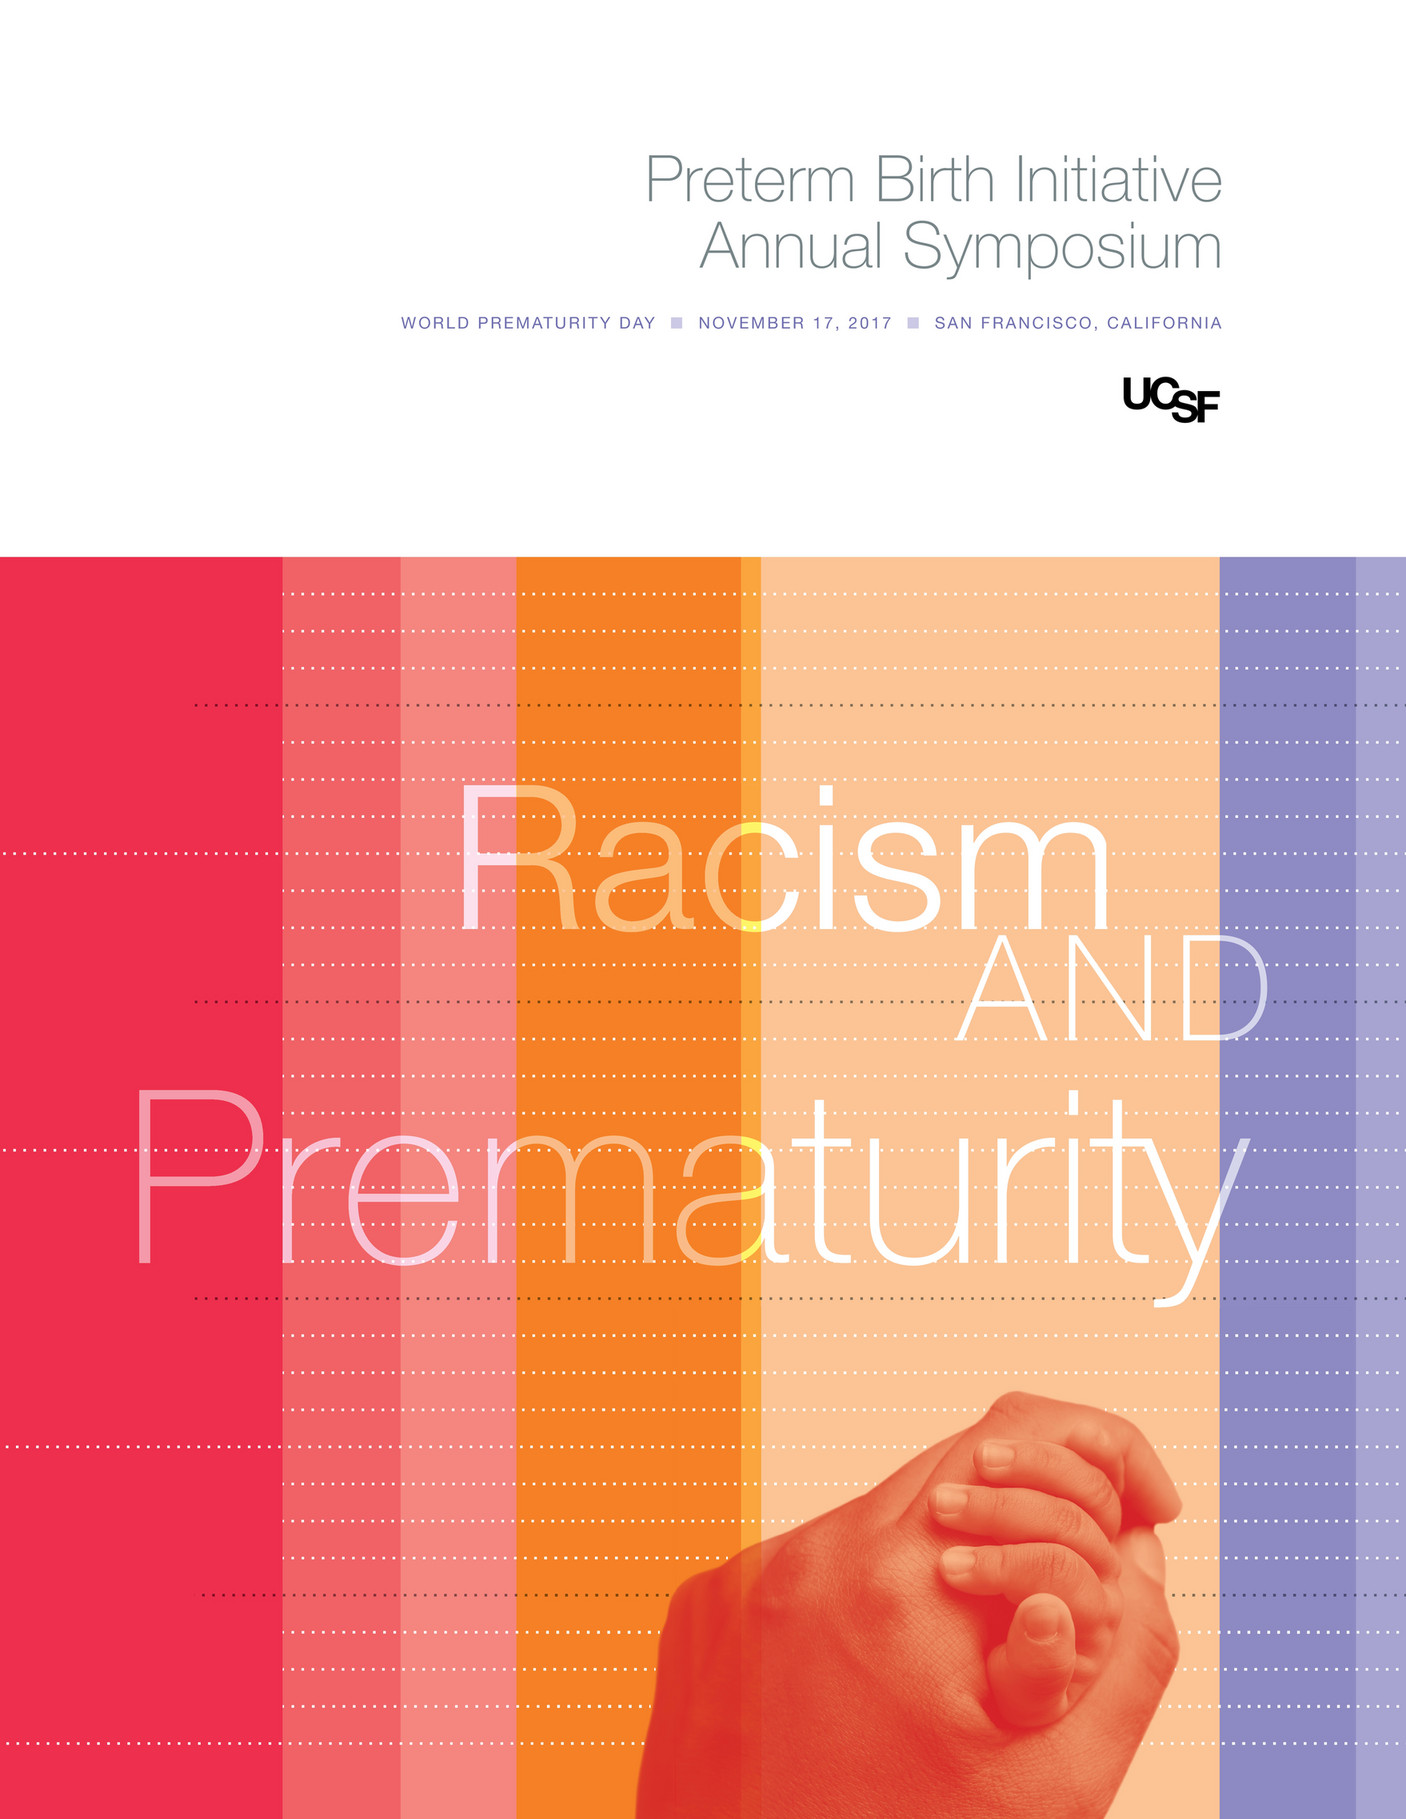 ucsf-ucsf-ptbi-symposium-program-book-page-1-created-with